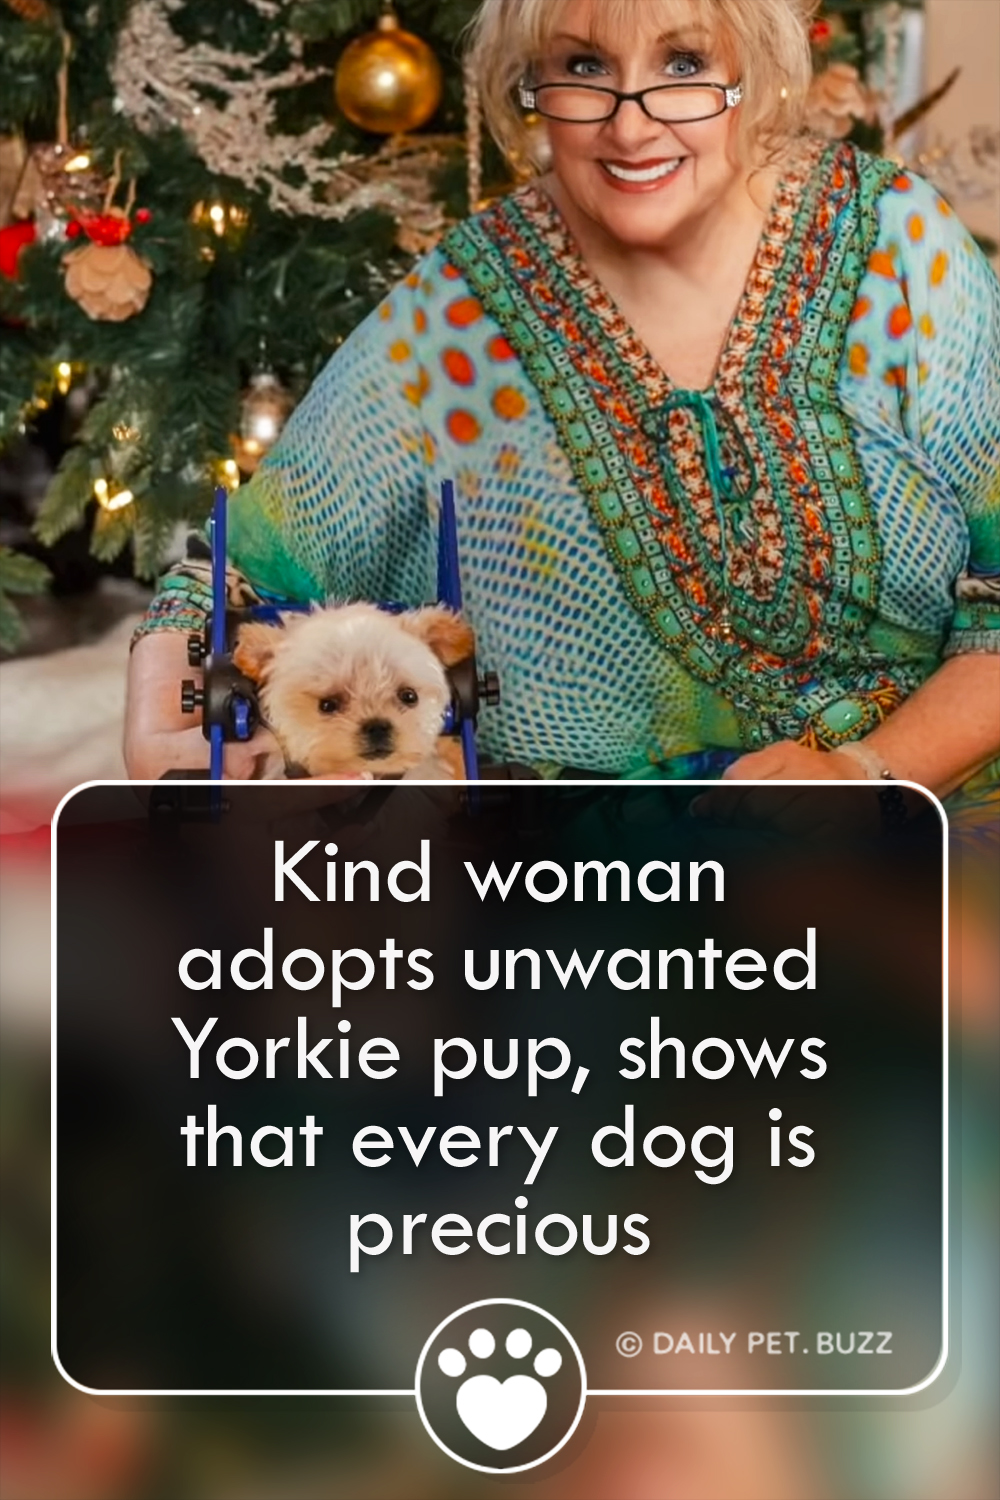 Kind woman adopts unwanted Yorkie pup, shows that every dog is precious